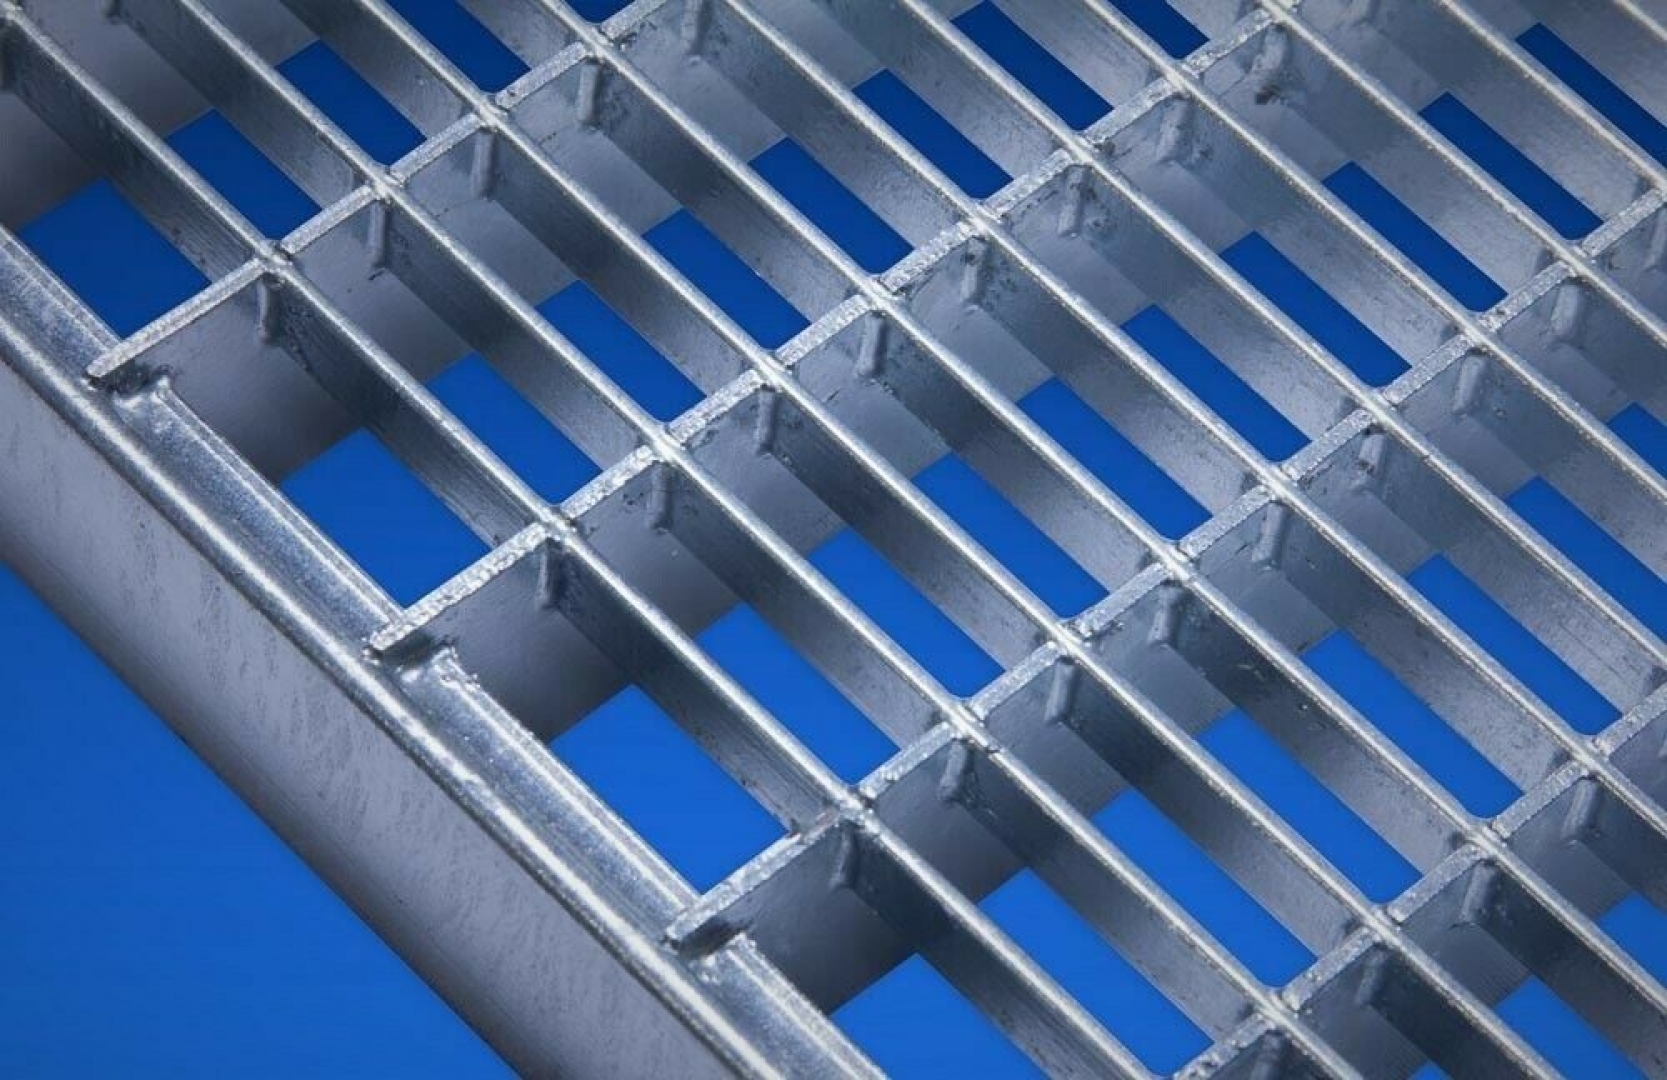 Baunorm grating 340x490mm galvanized mesh size 30x10mm height 20mm without frame